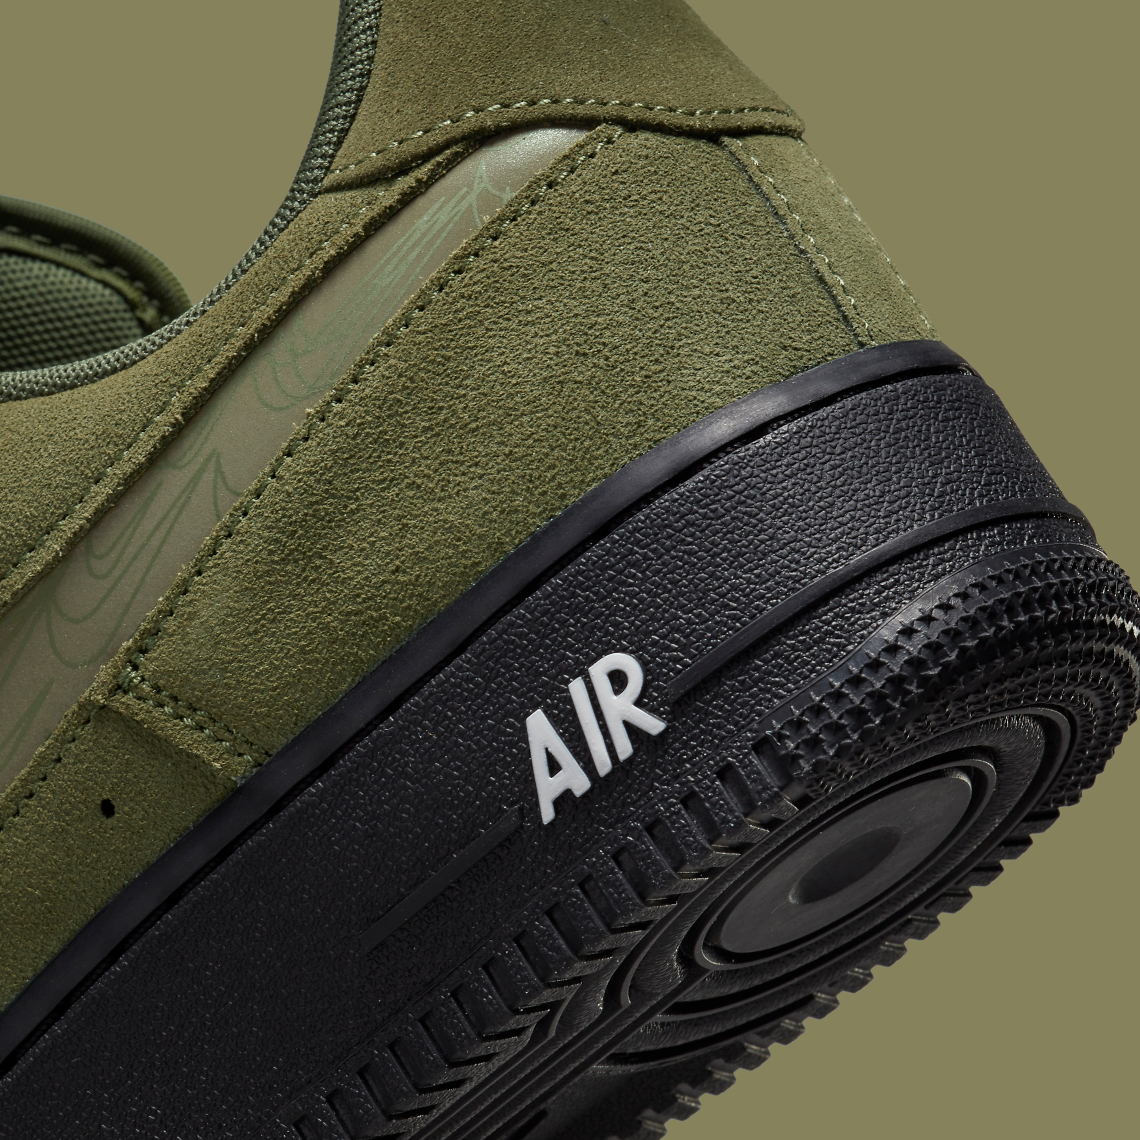 olive green nike air force ones